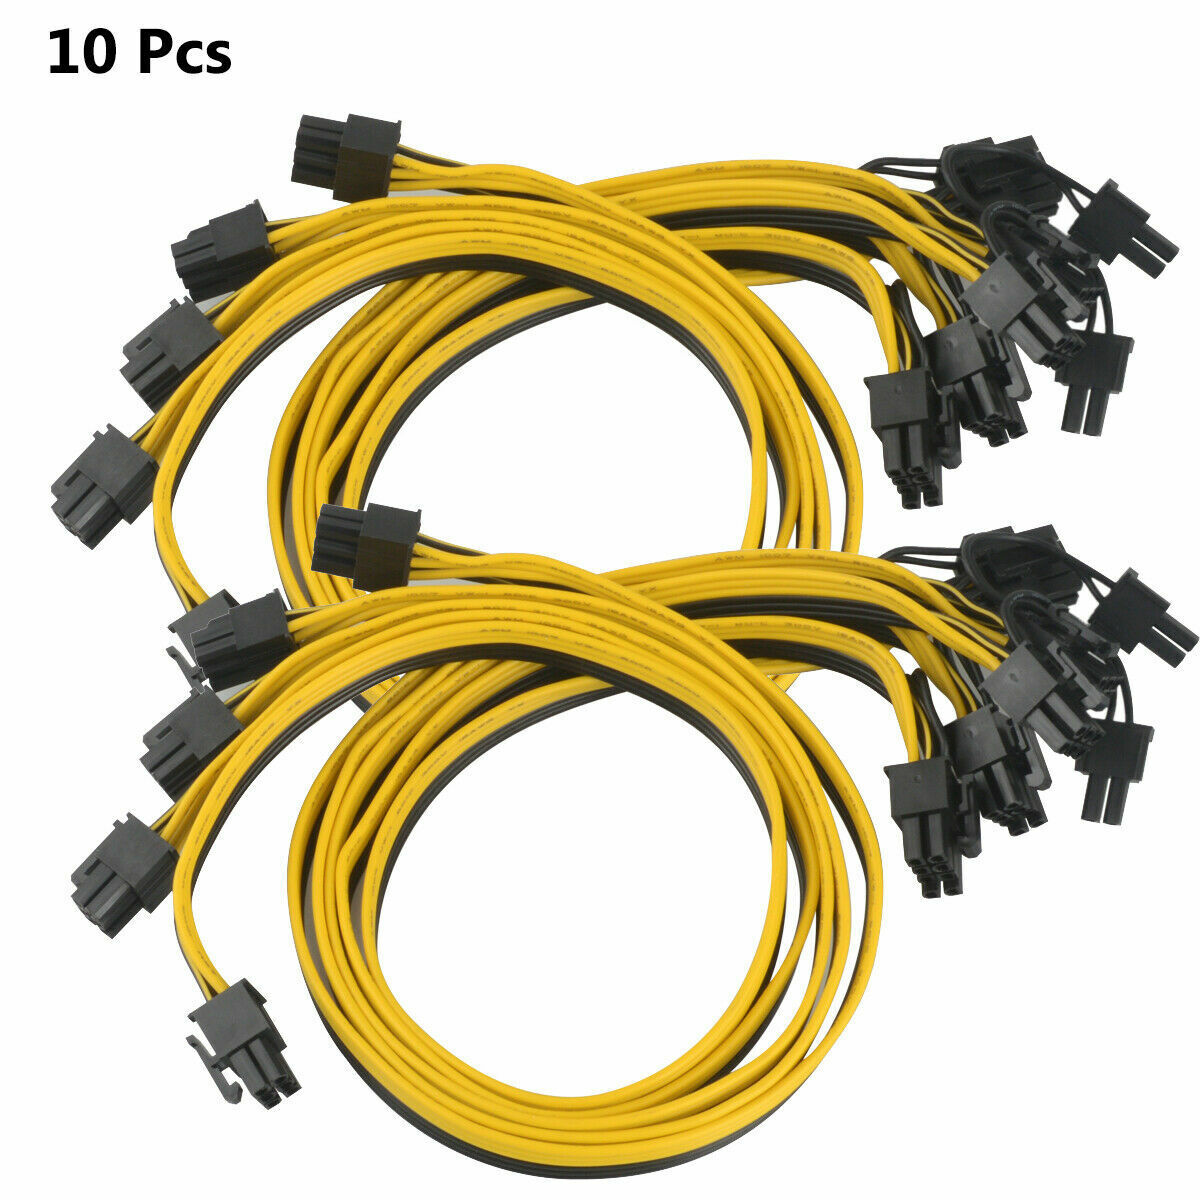 10 Pcs PCIE 6 pin male to PCI-E 8 pin Male GPU Power Cable Only For Breakout US